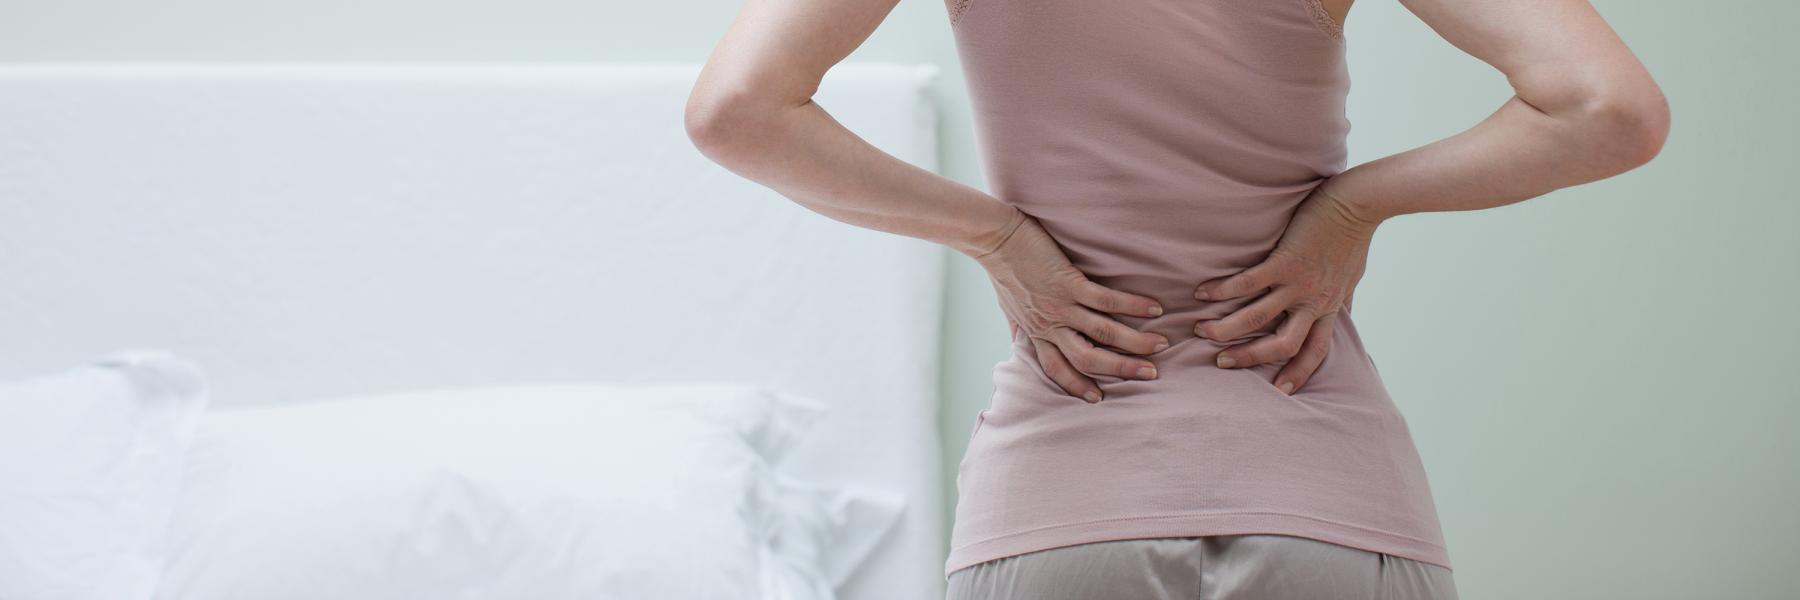 Woman holding bottom of back due to endo symptoms